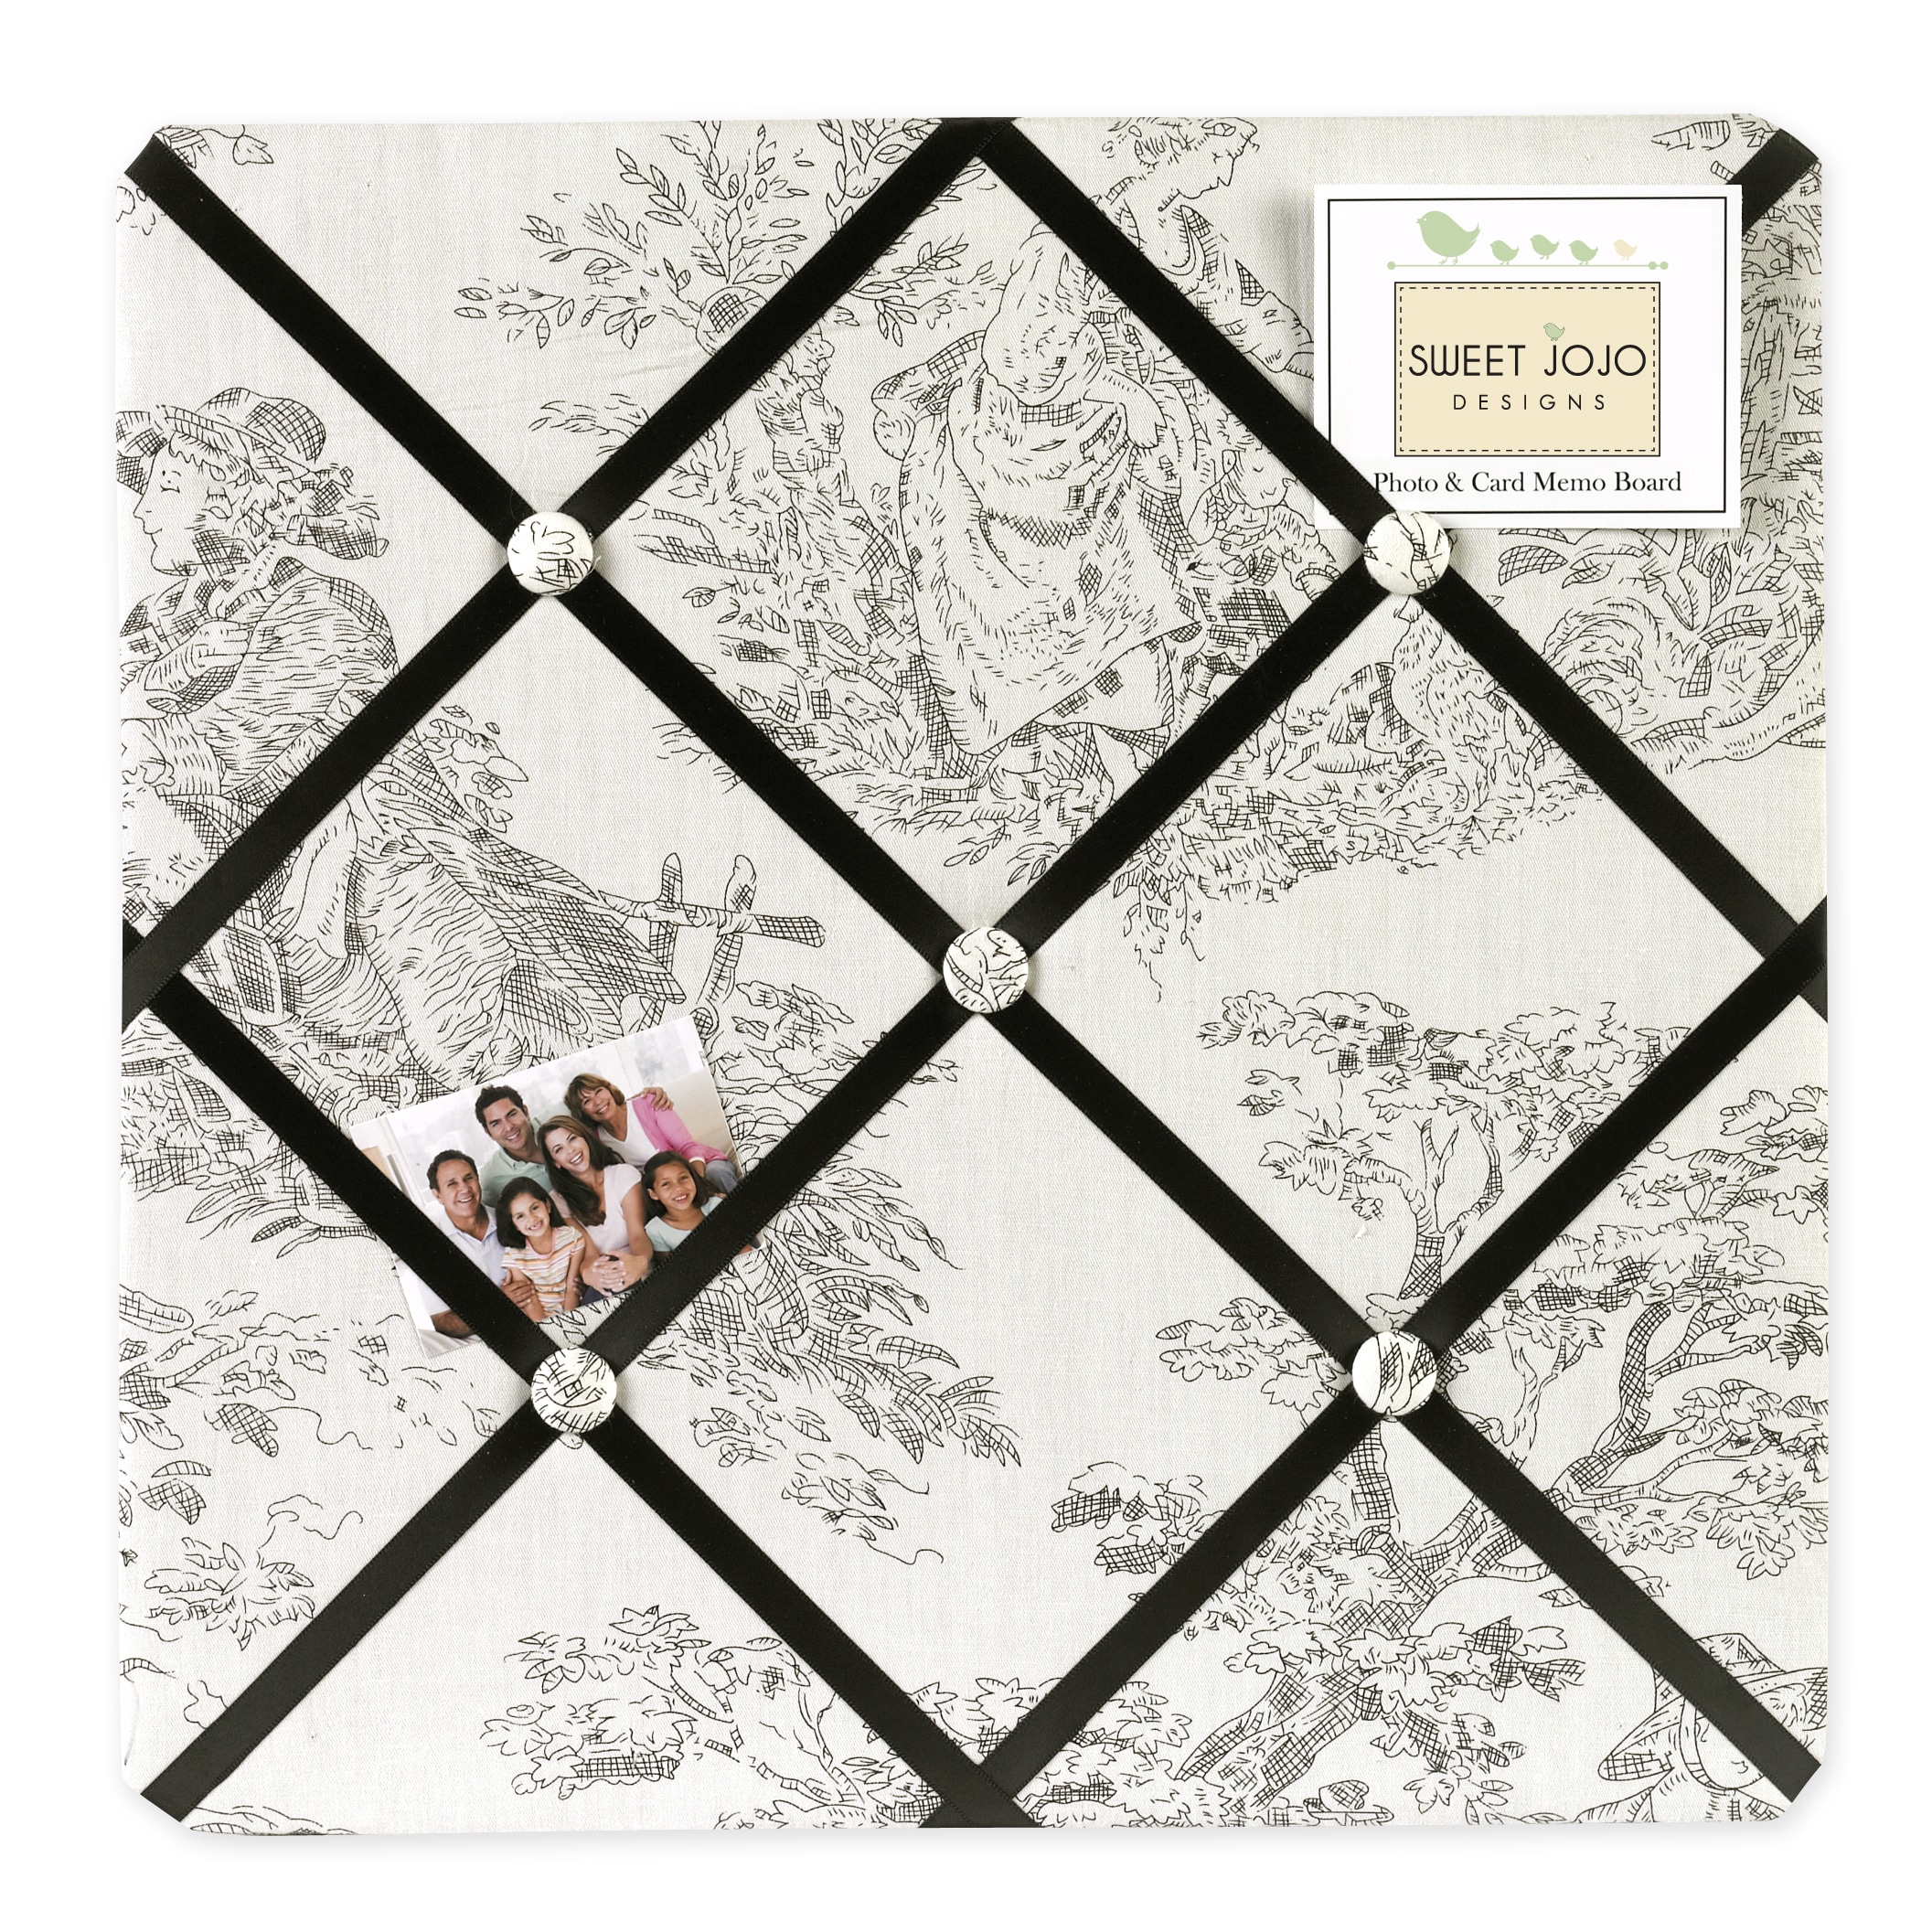 Sweet Jojo Designs Black French Toile Fabric Bulletin Board (CottonDimensions 14 inches high x 14 inches wide)